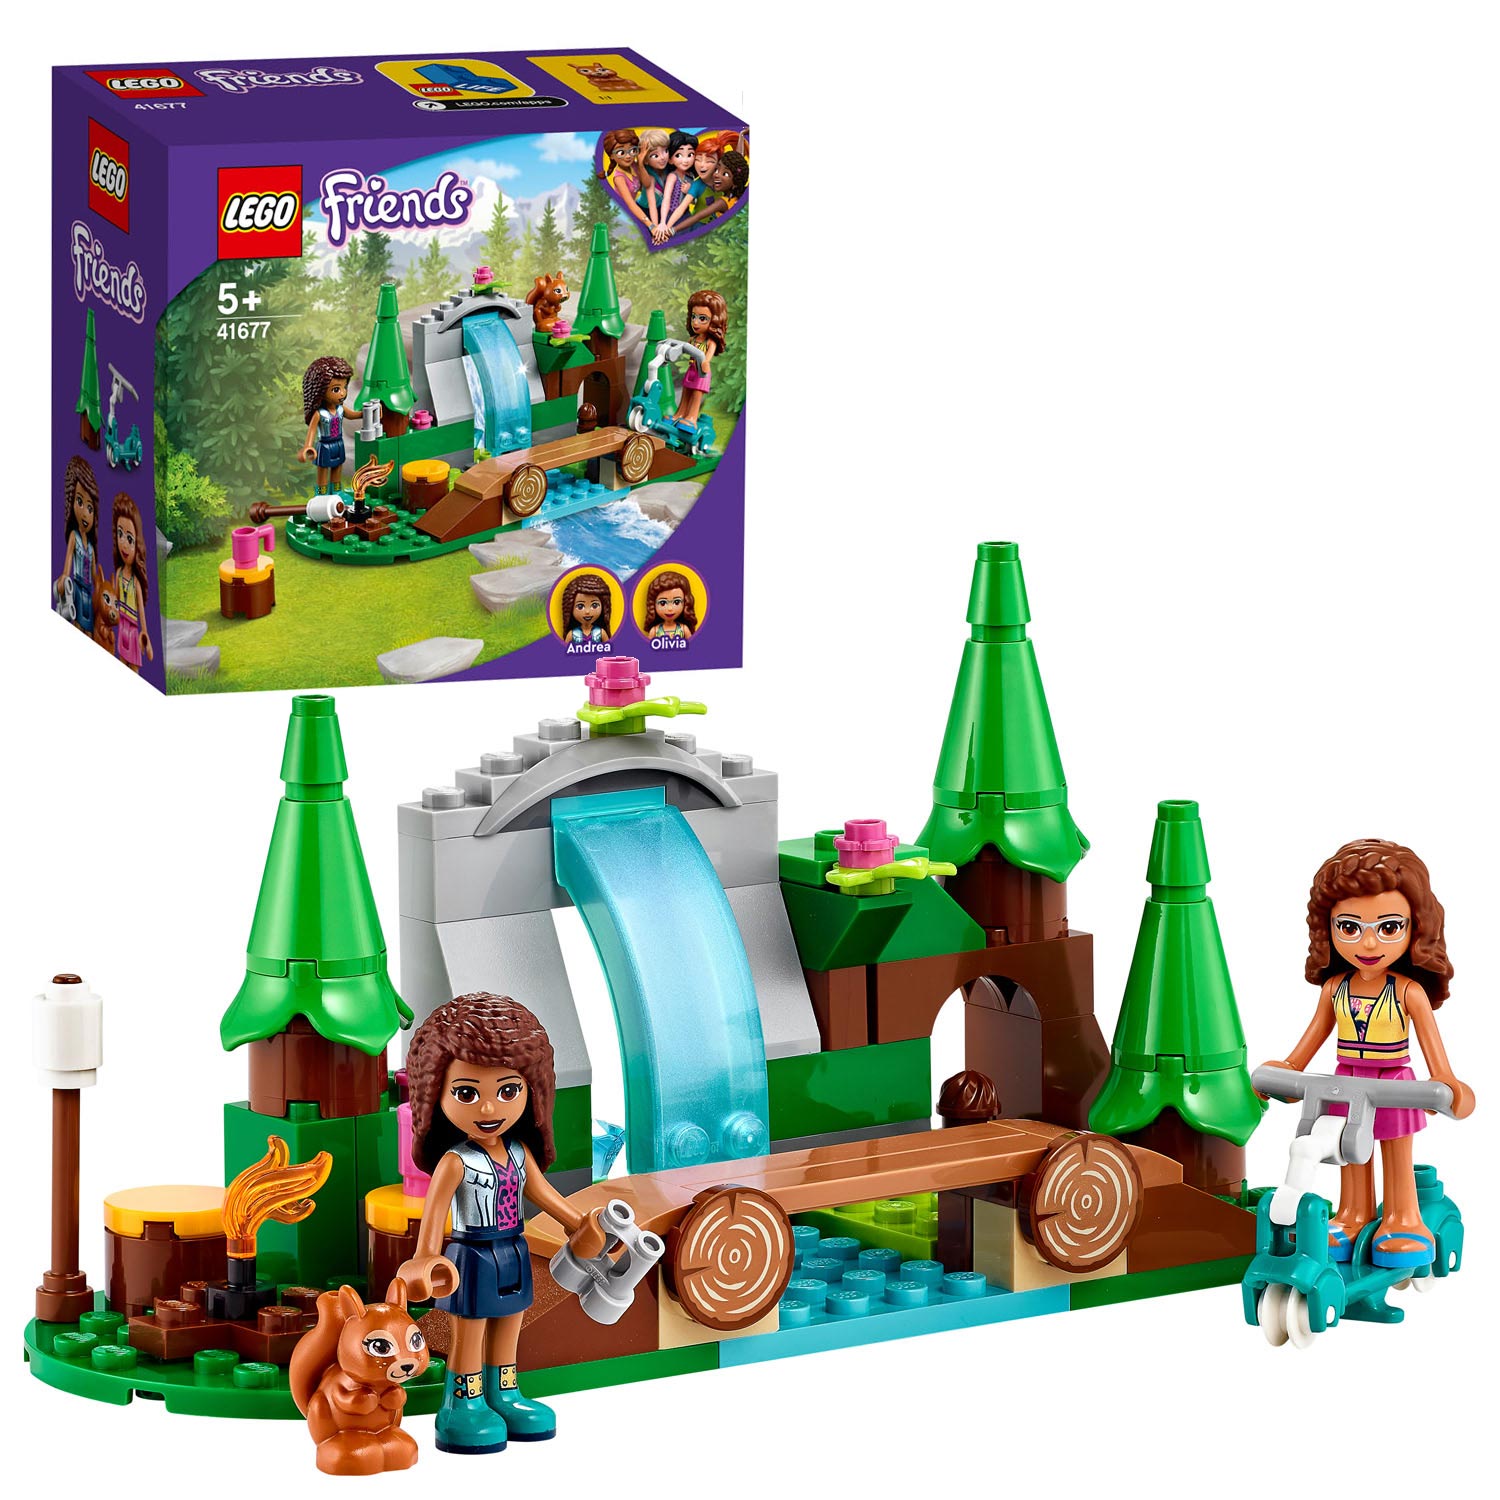 LEGO Friends 41677 Waterfall in the | Thimble